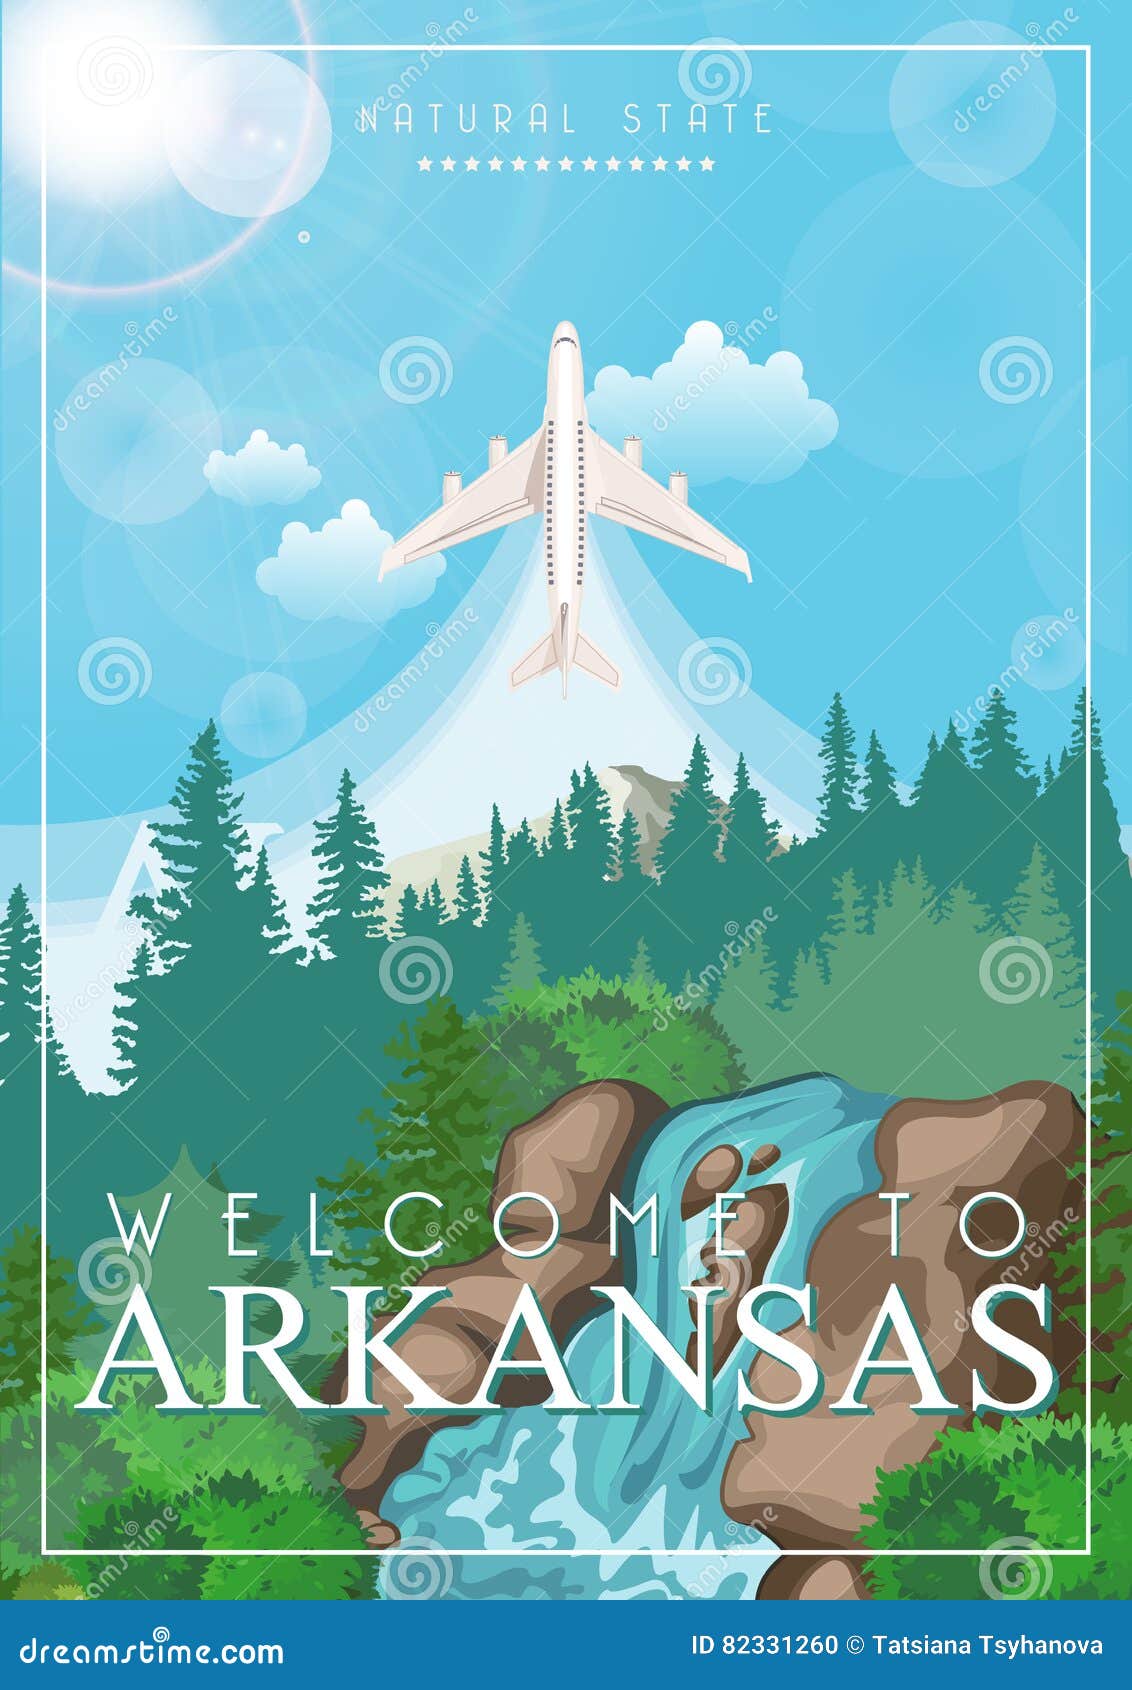 arkansas american travel banner. natural state. arkansas poster with airplane